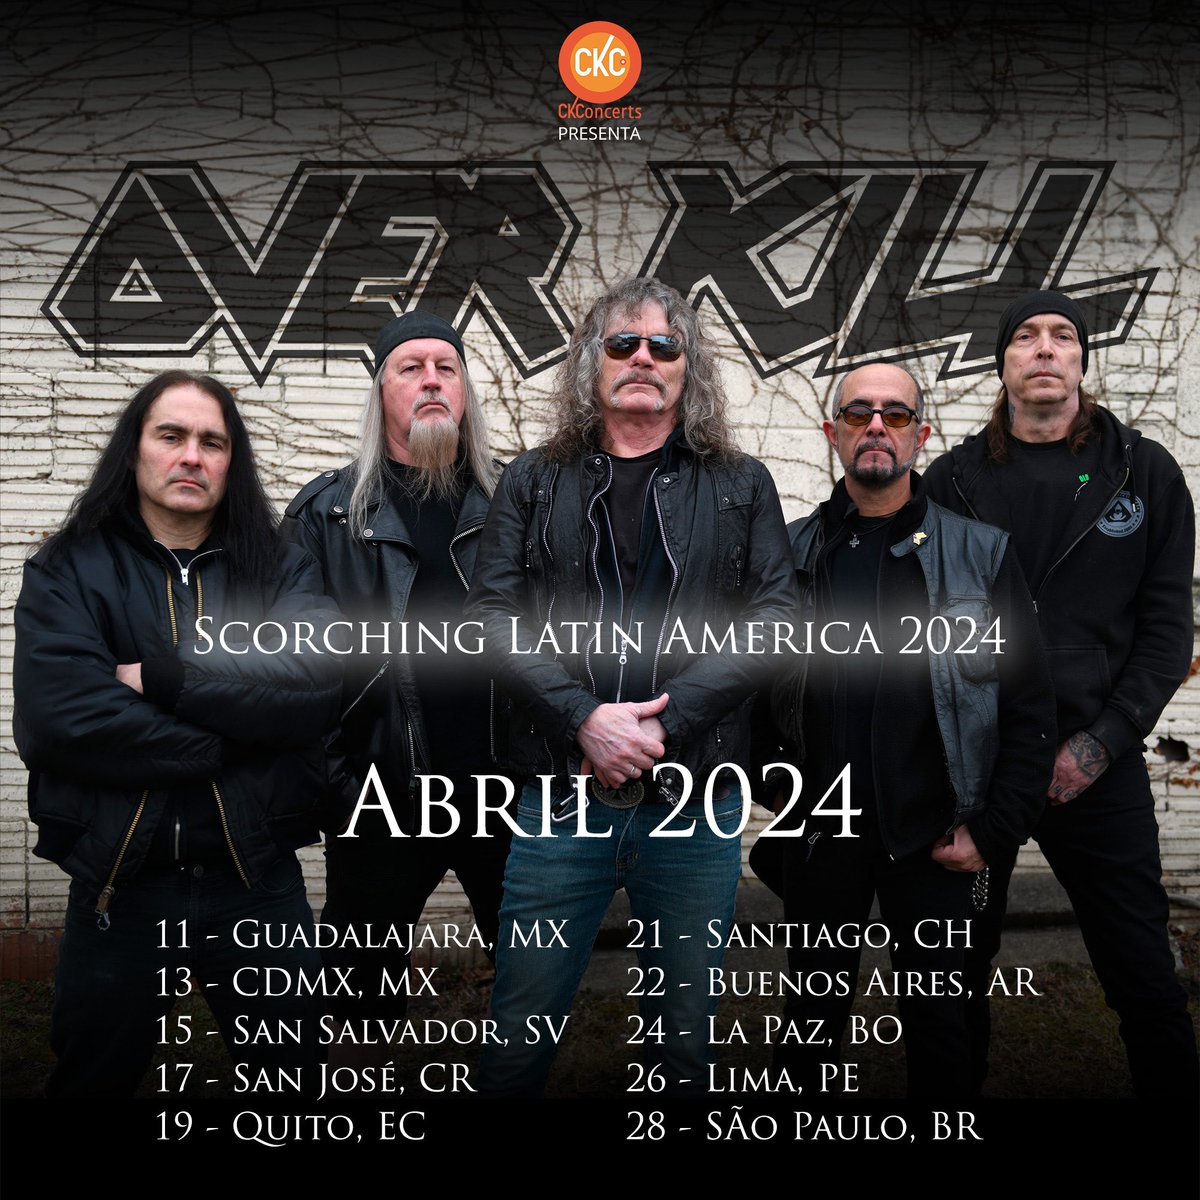 Latin America tour kicks off in April! Who’s coming? 💚🖤🦇 #Overkill